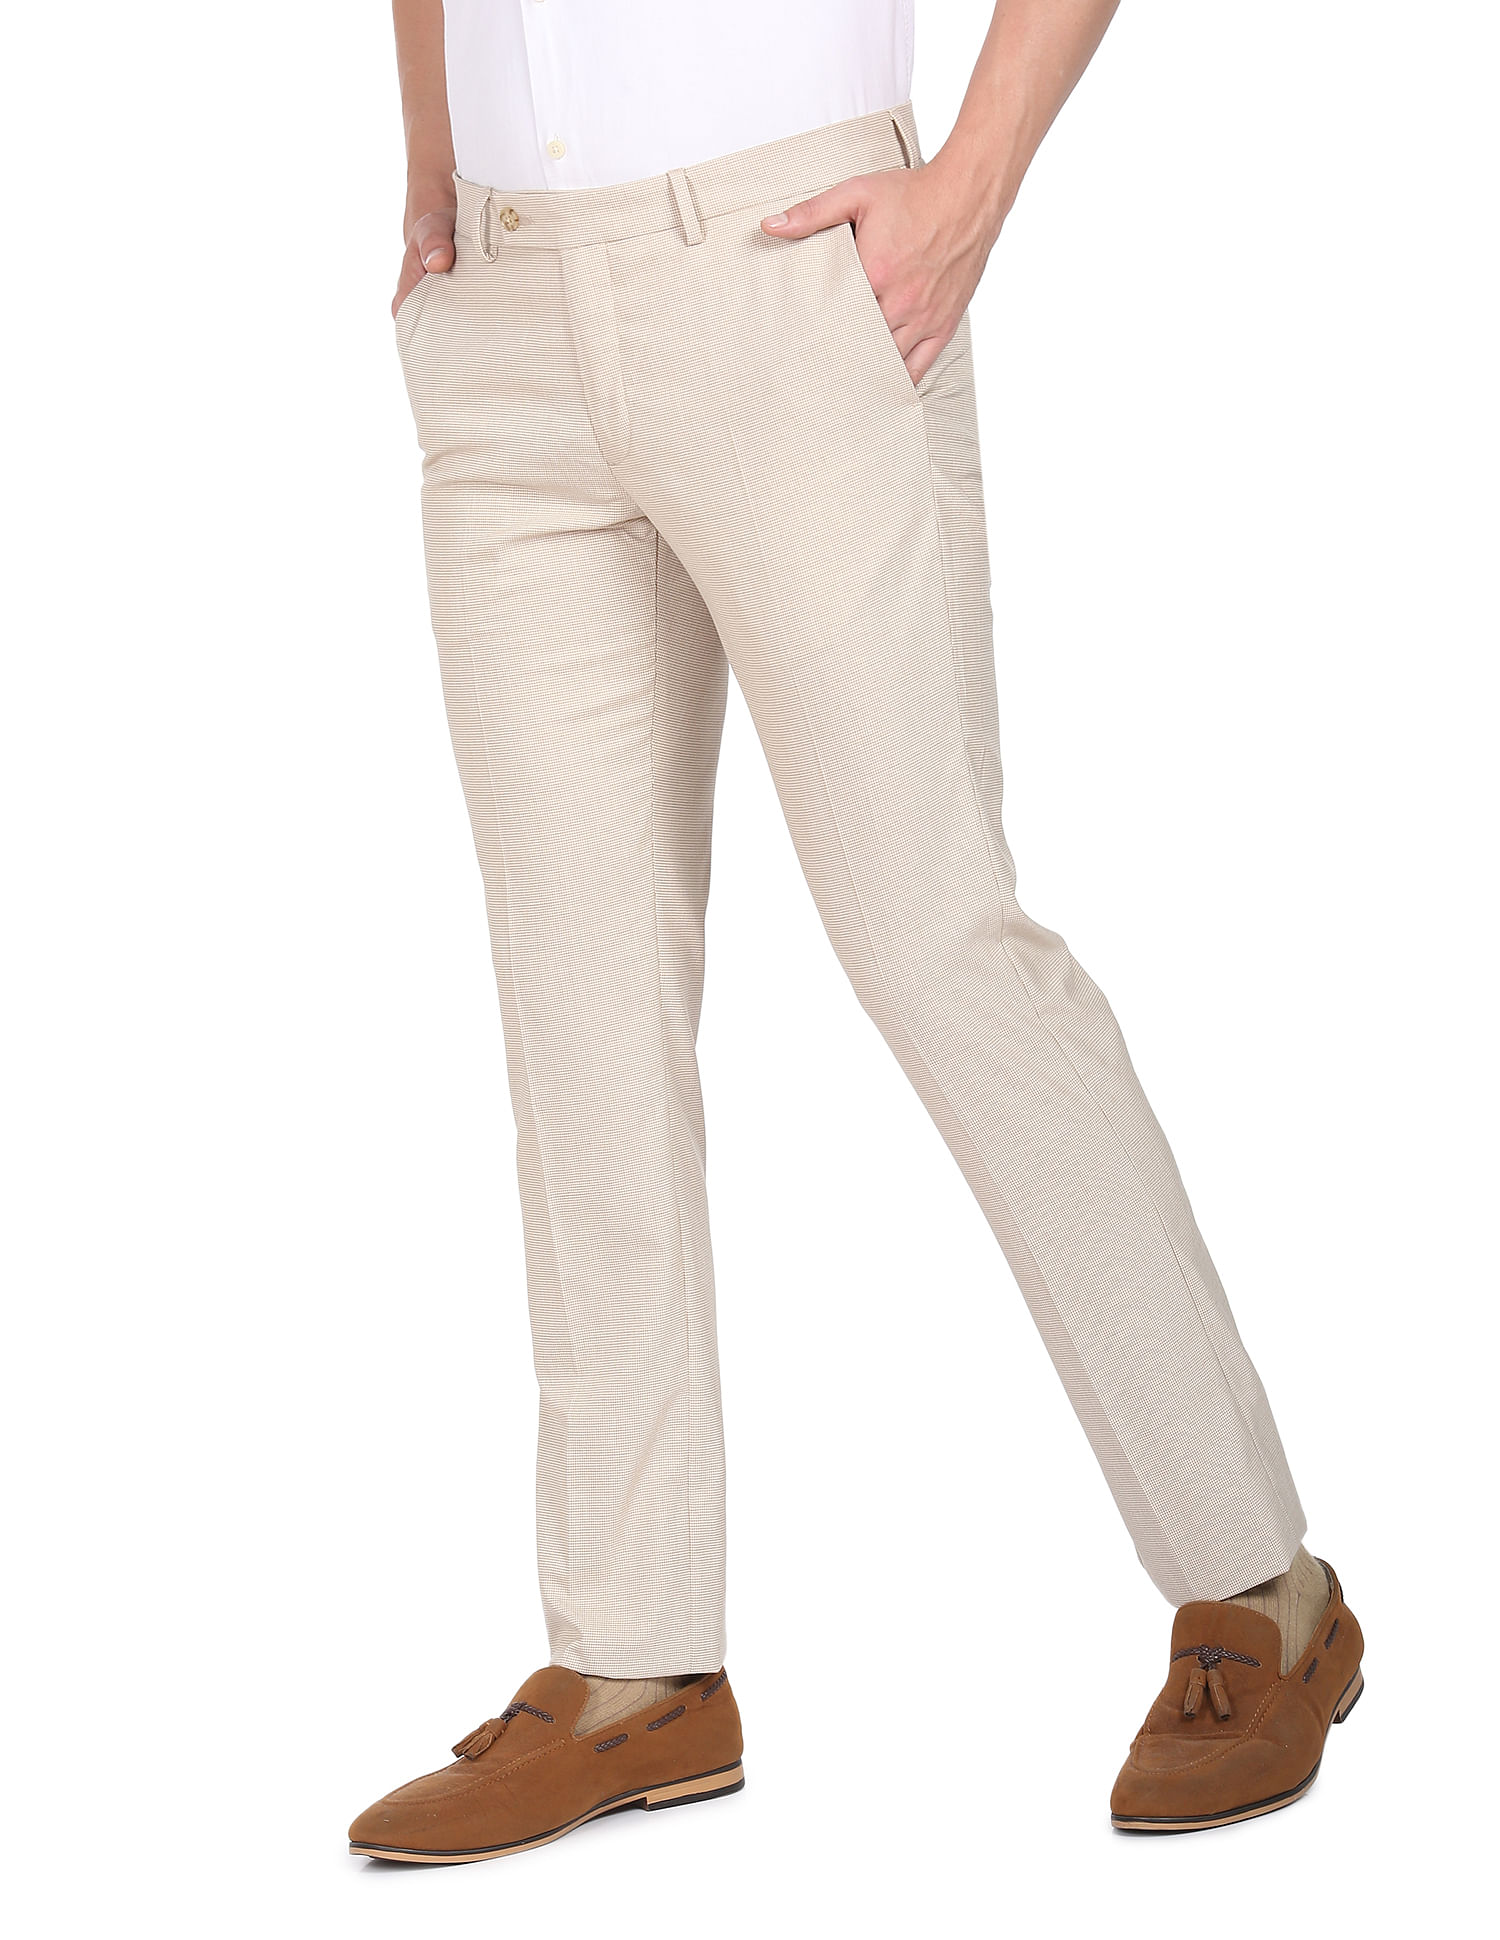 Smart Active Infusion Trousers, ecru white